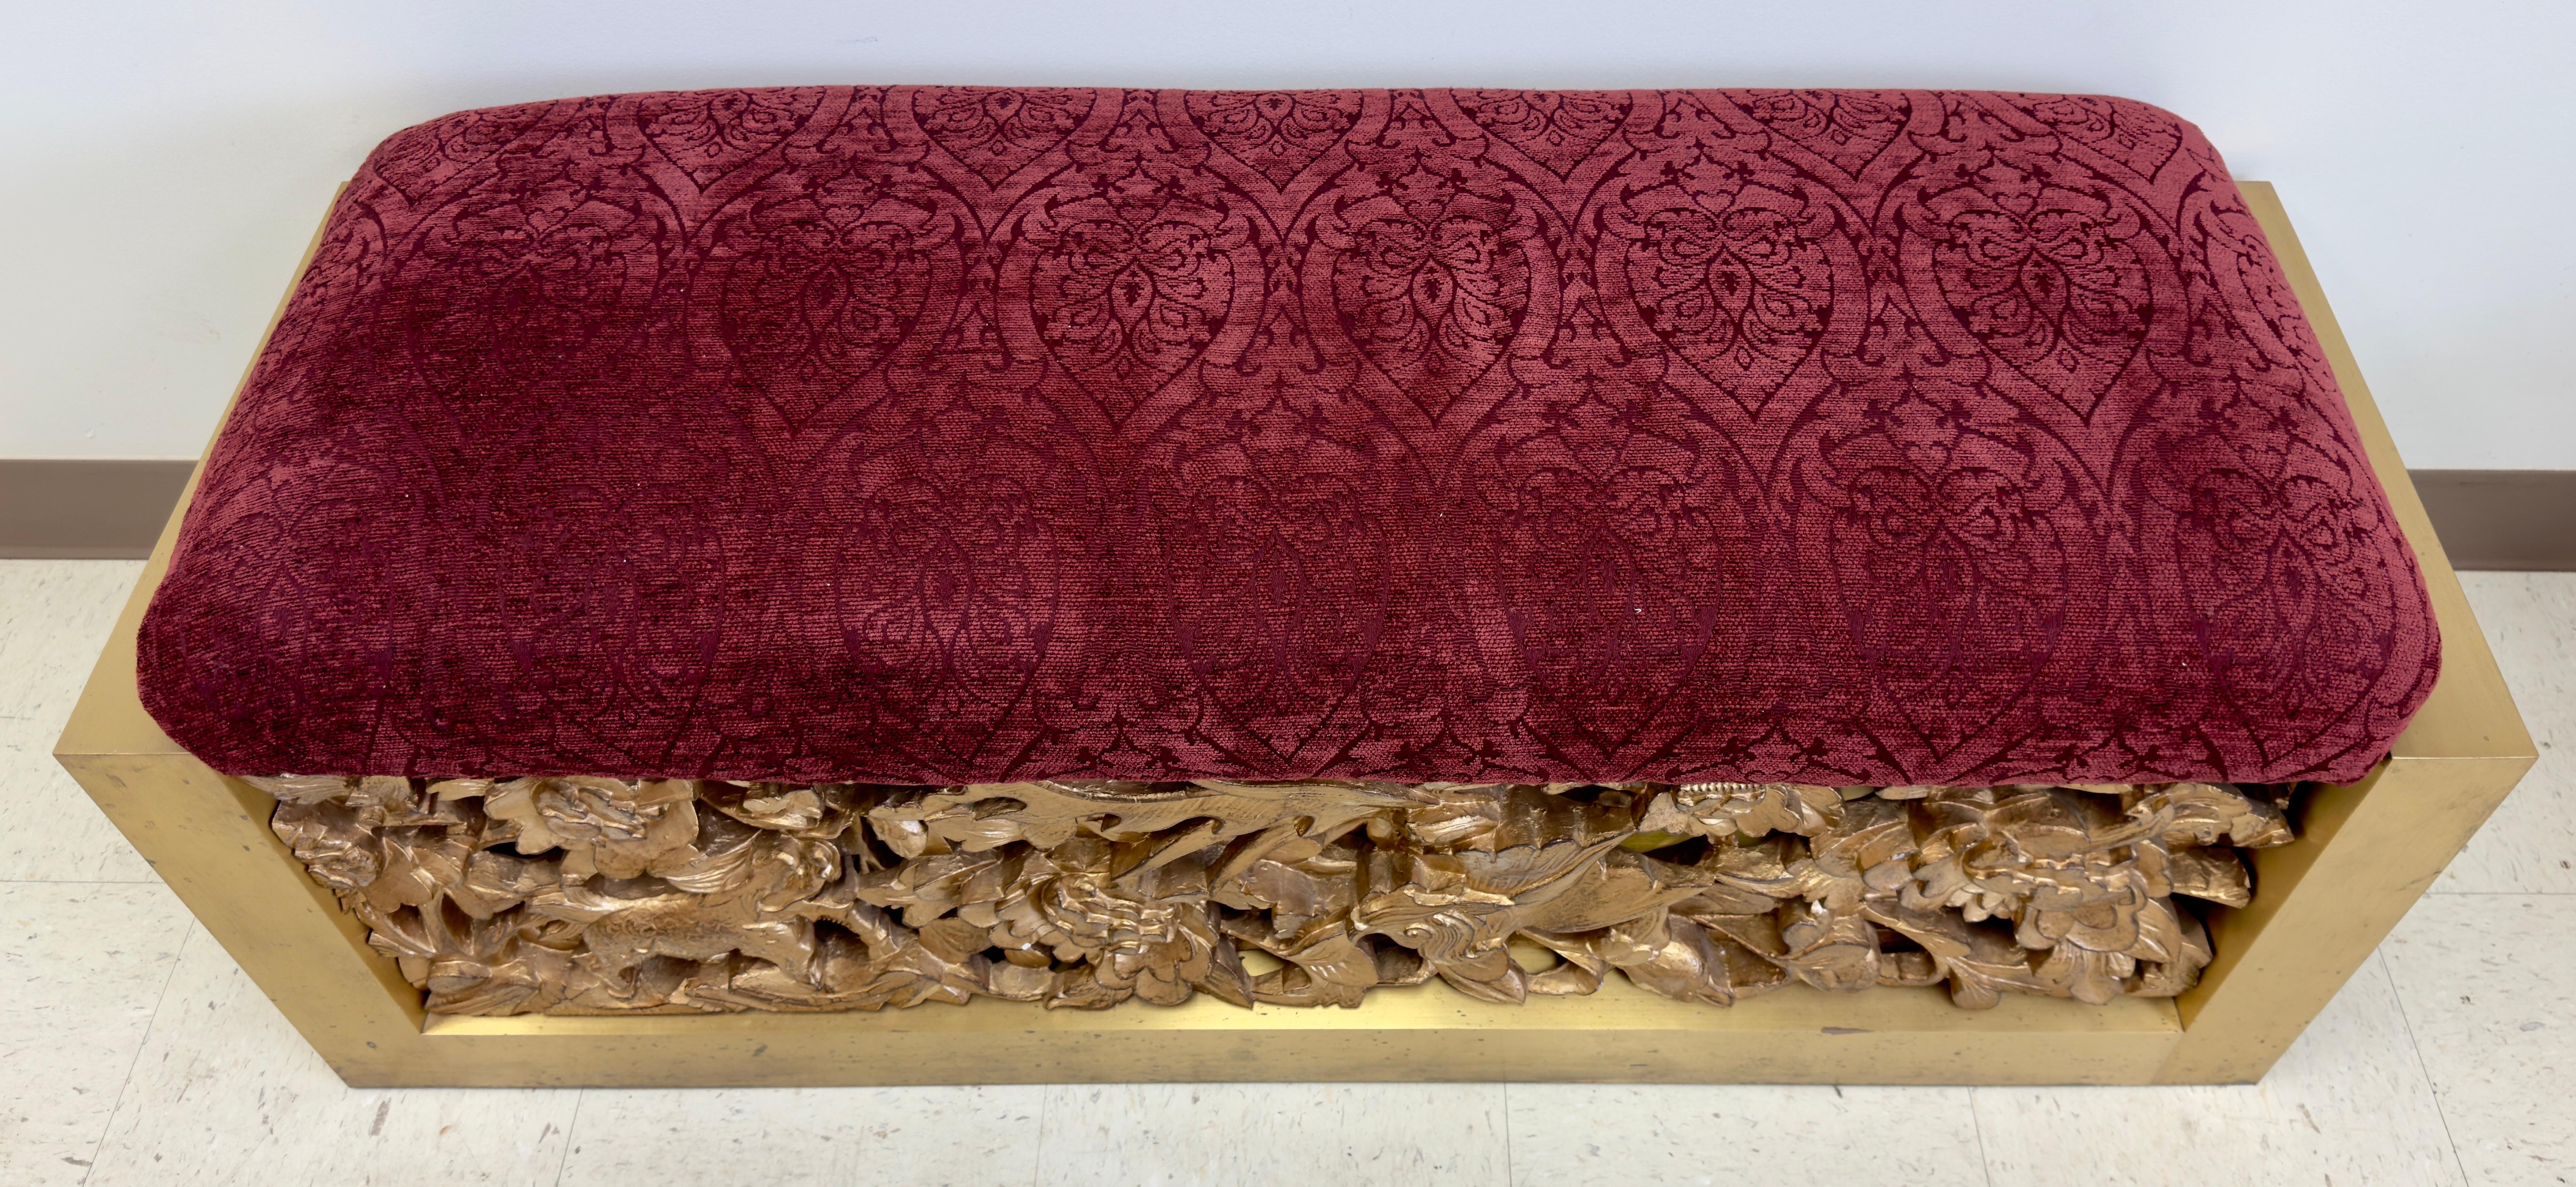 A stunning red suede top bench by Lorin Marsh. This one of a kind bench features a fine hand carved gilt wood base on both side (Front and Back). The bench sides are made of steel in an elegant beveled cut. The carving shows flowers, leafs, birds